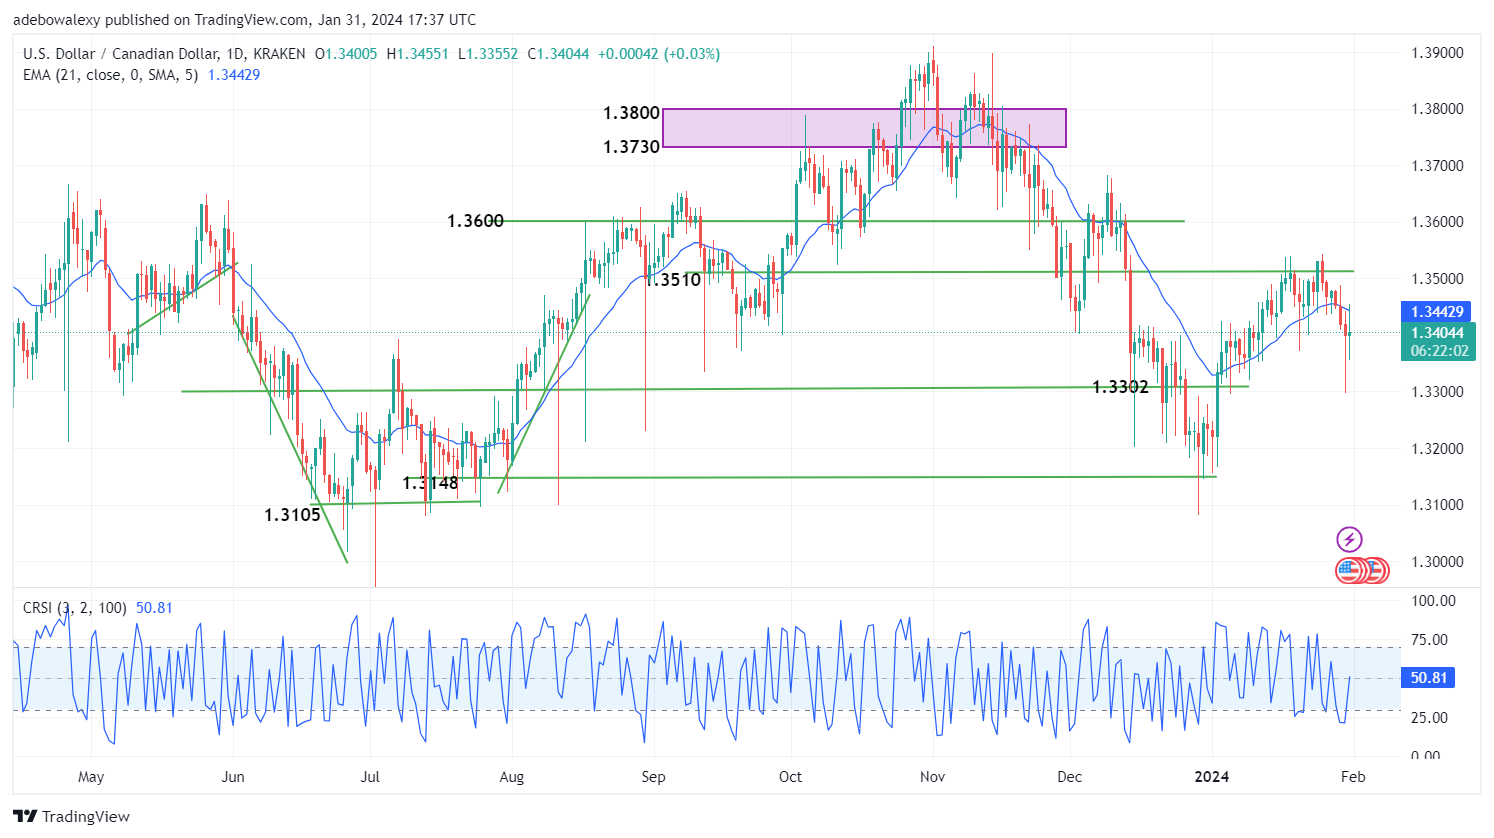 USDCAD Continues to Battle Headwinds